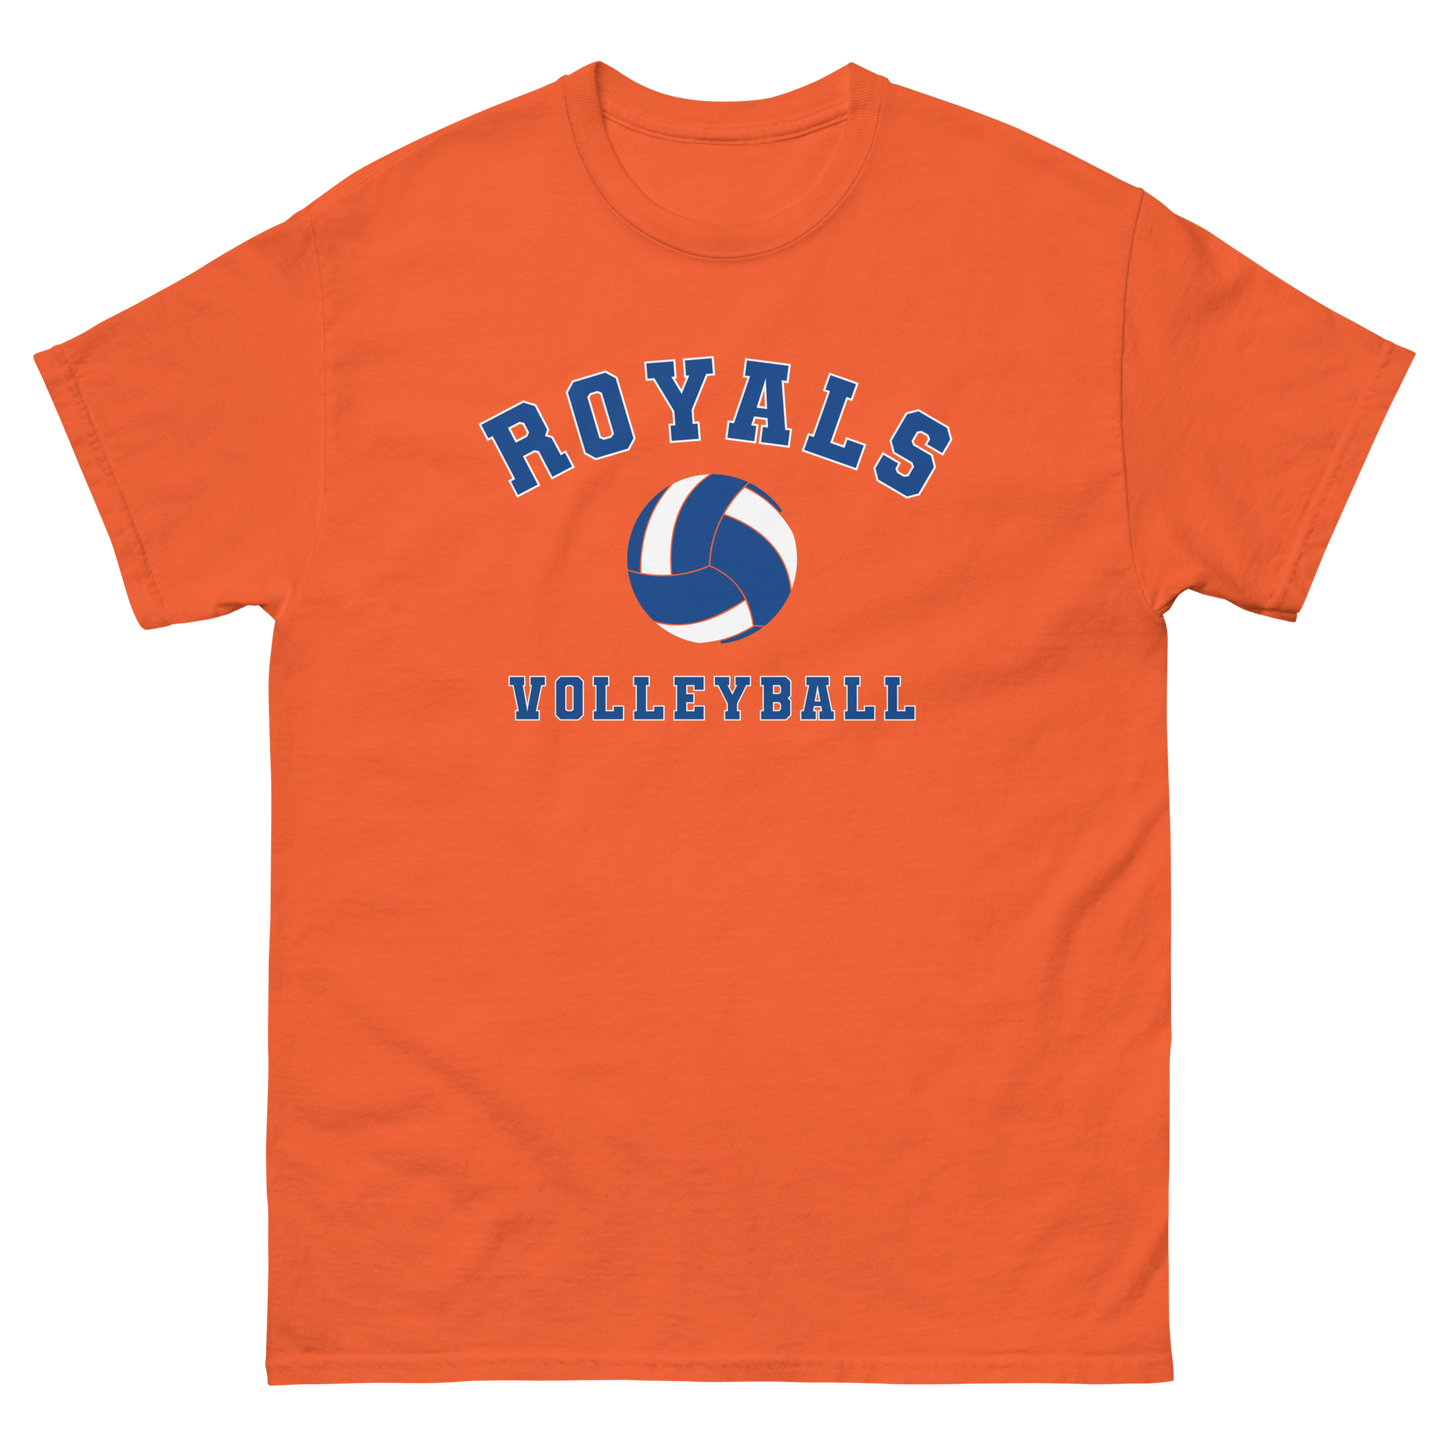 Royals Volleyball Men's classic tee